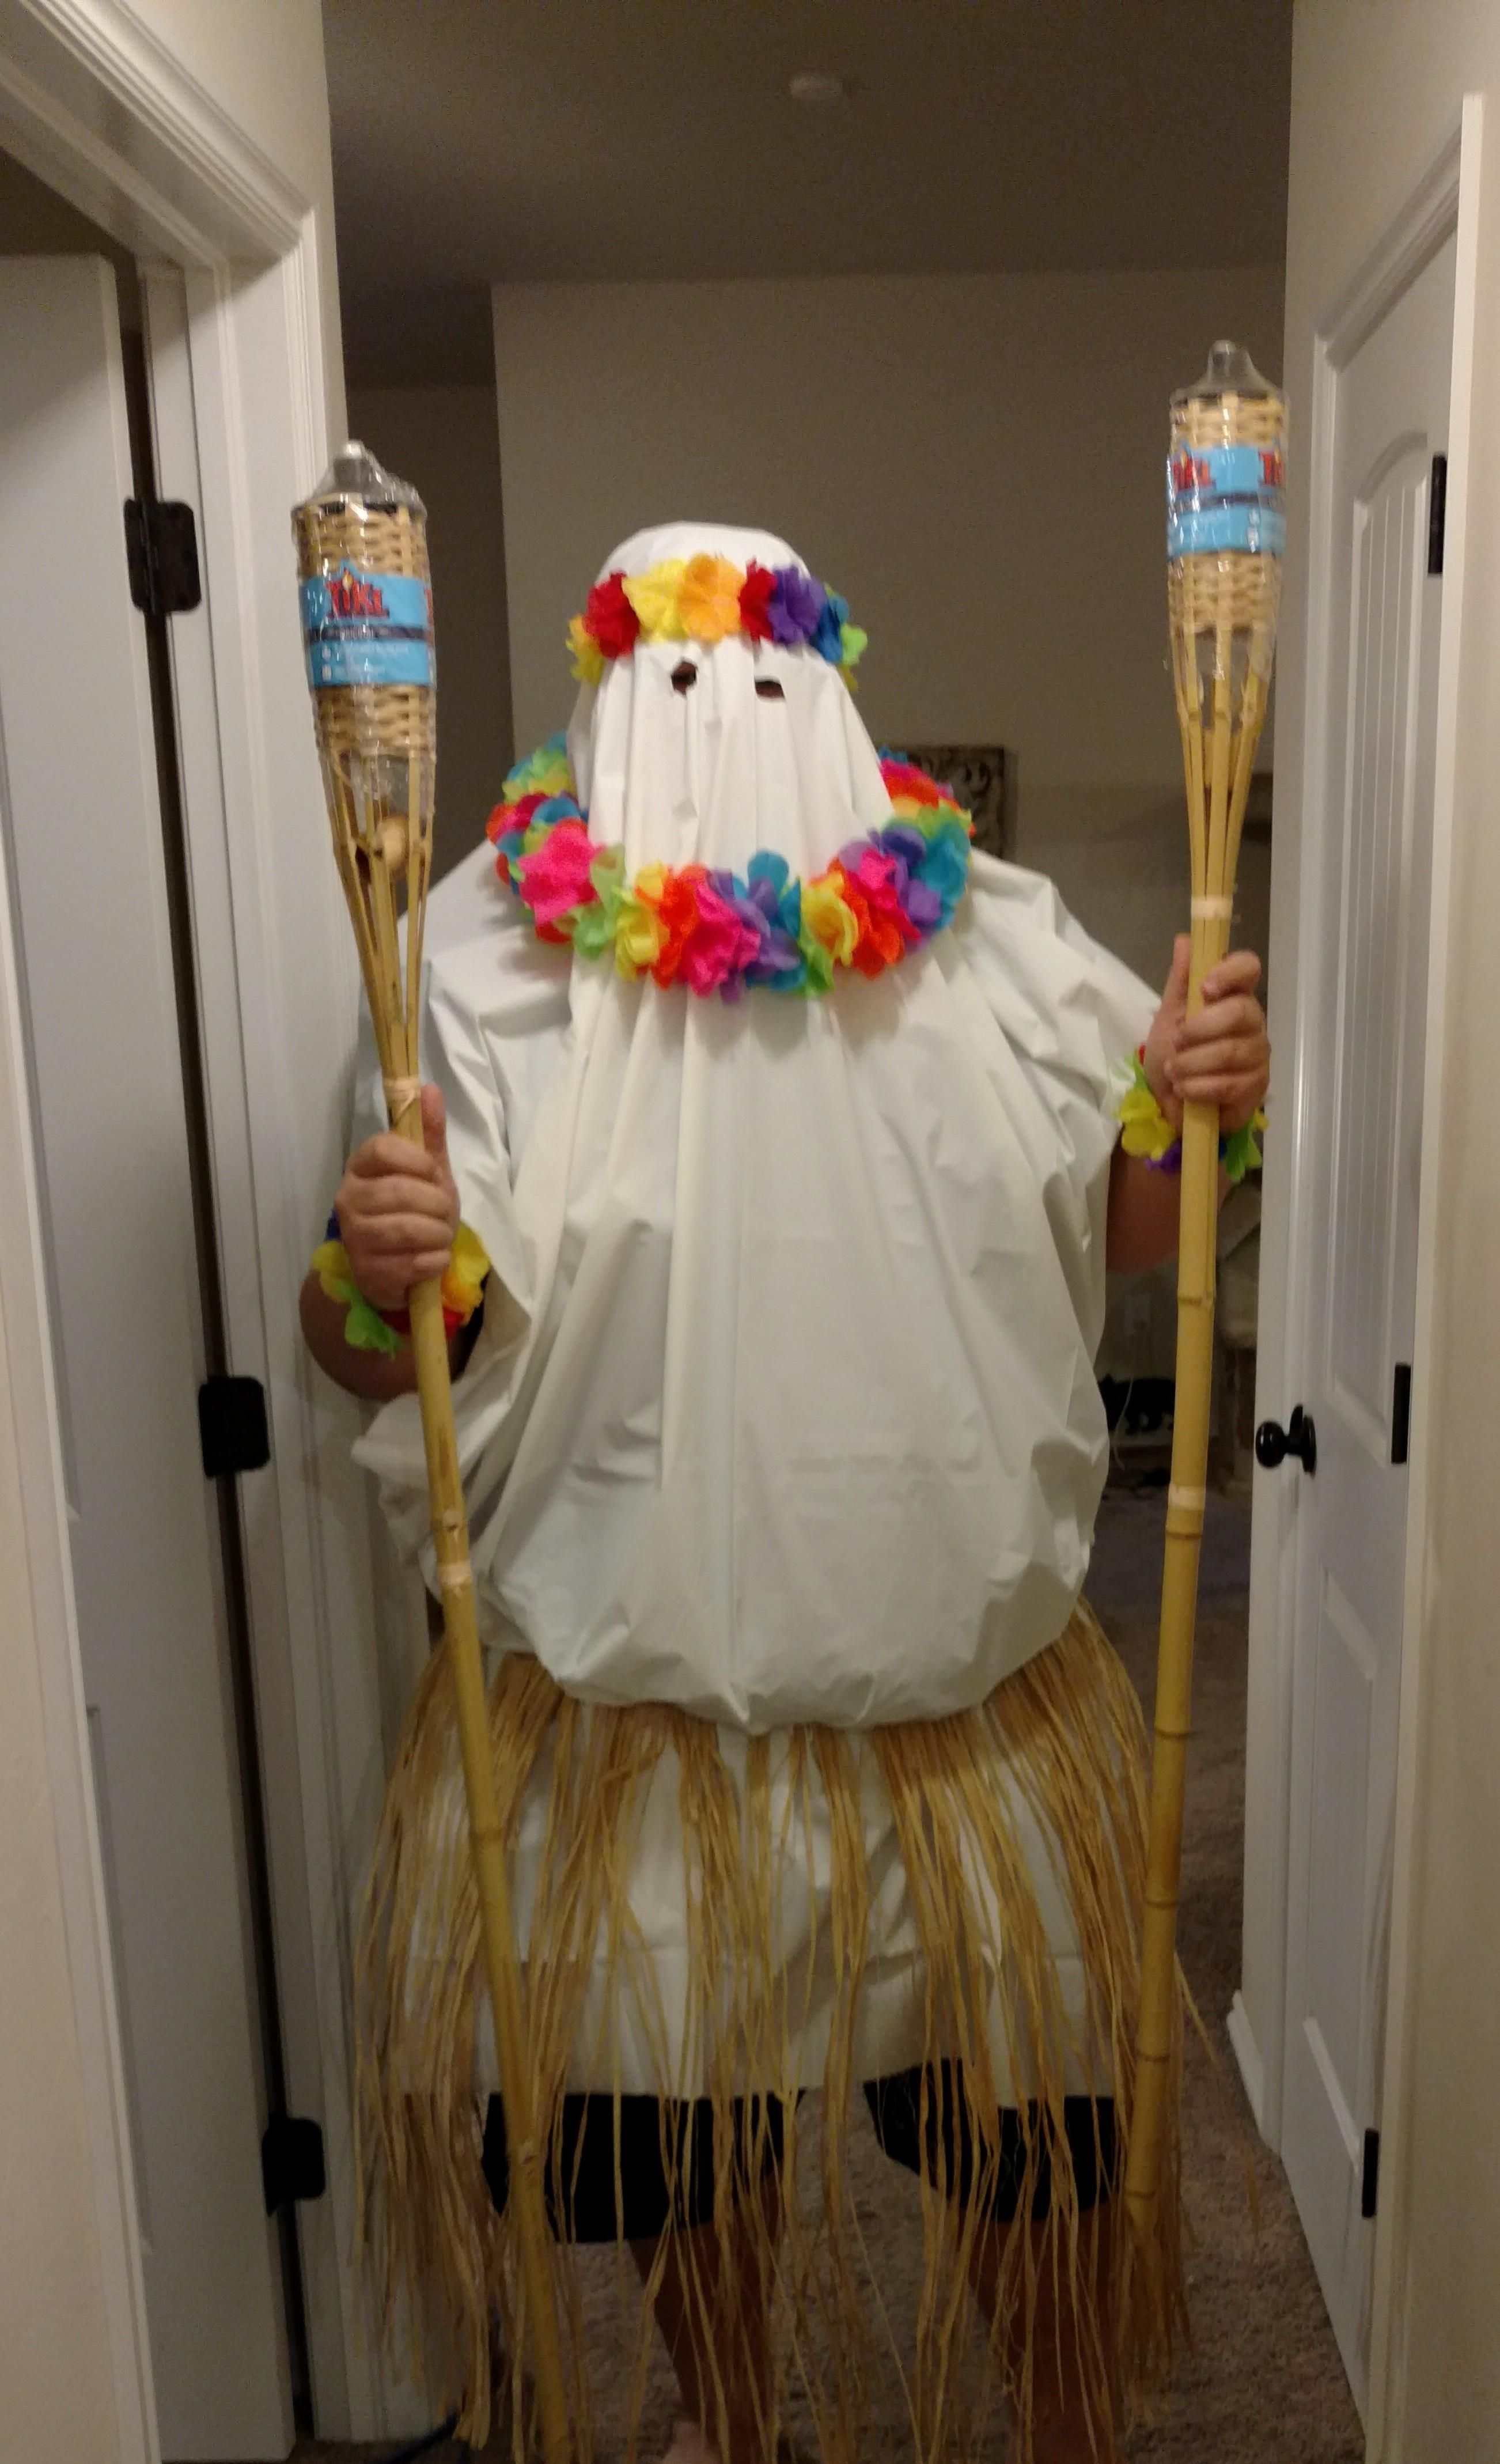 So, luau ghost may not be an appropriate Halloween costume anymore...